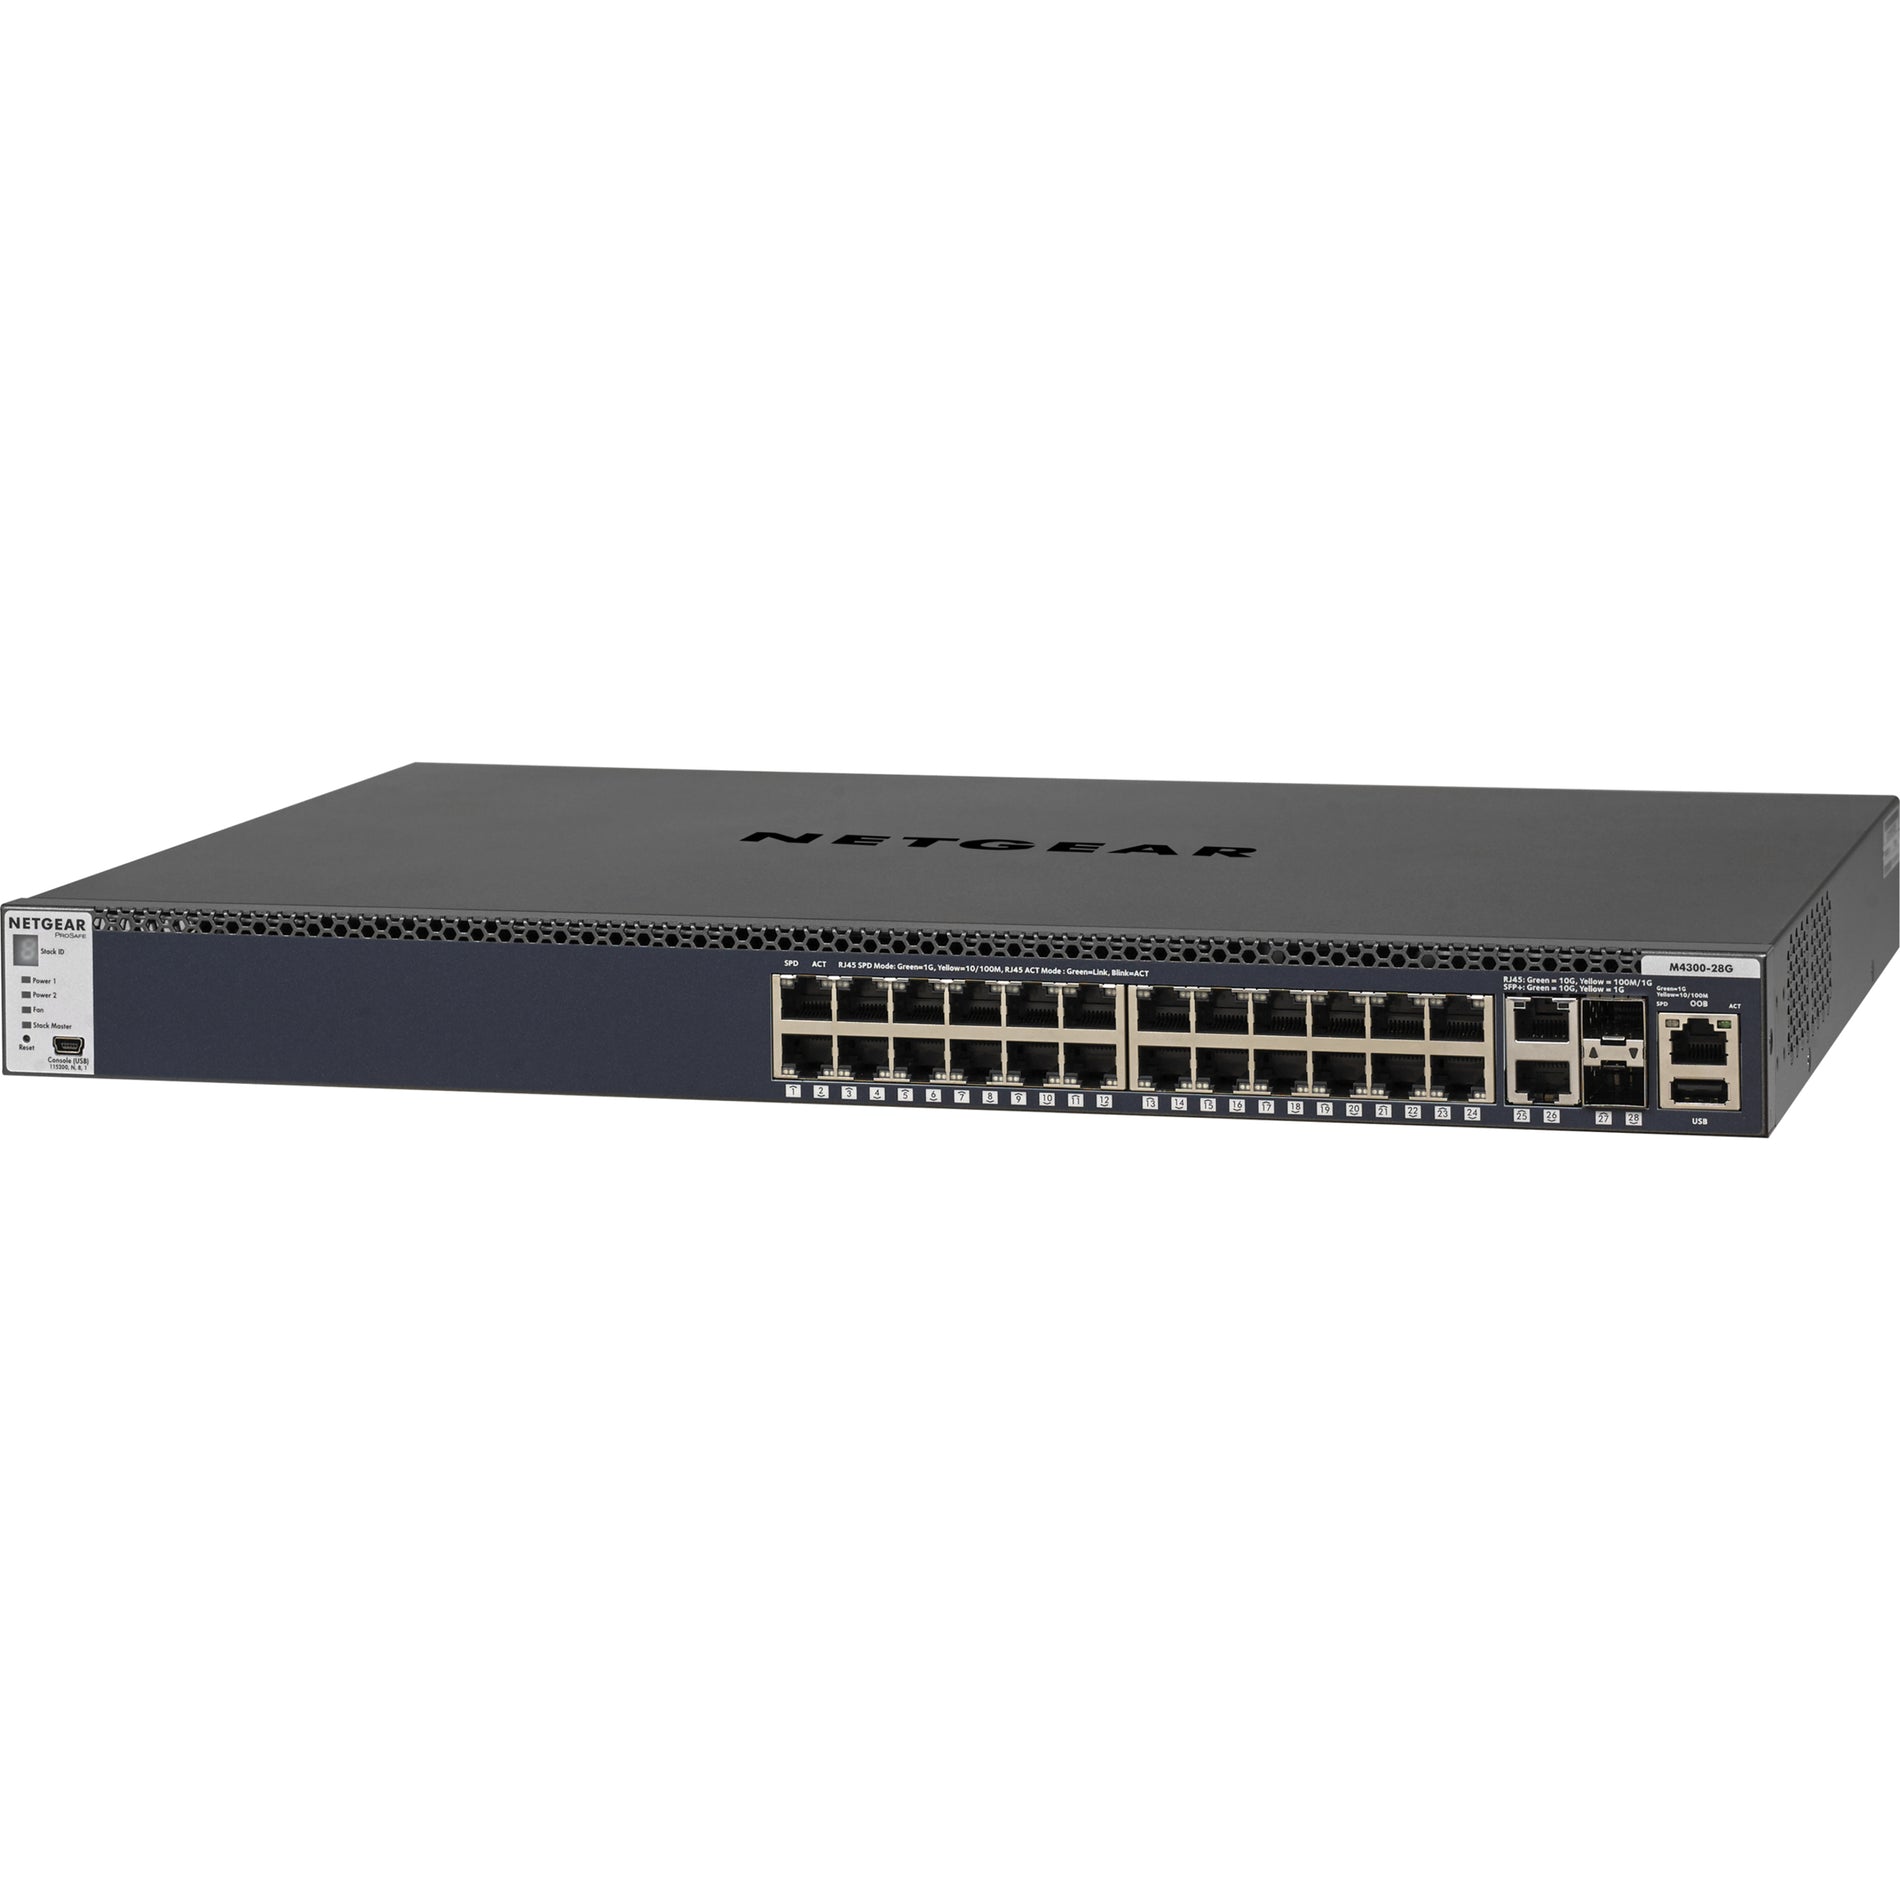 Netgear GSM4328S-100NES M4300-28G ProSafe Managed Switch, 24x1G Stackable, 2x10GBASE-T and 2xSFP+, Layer 3 Switch